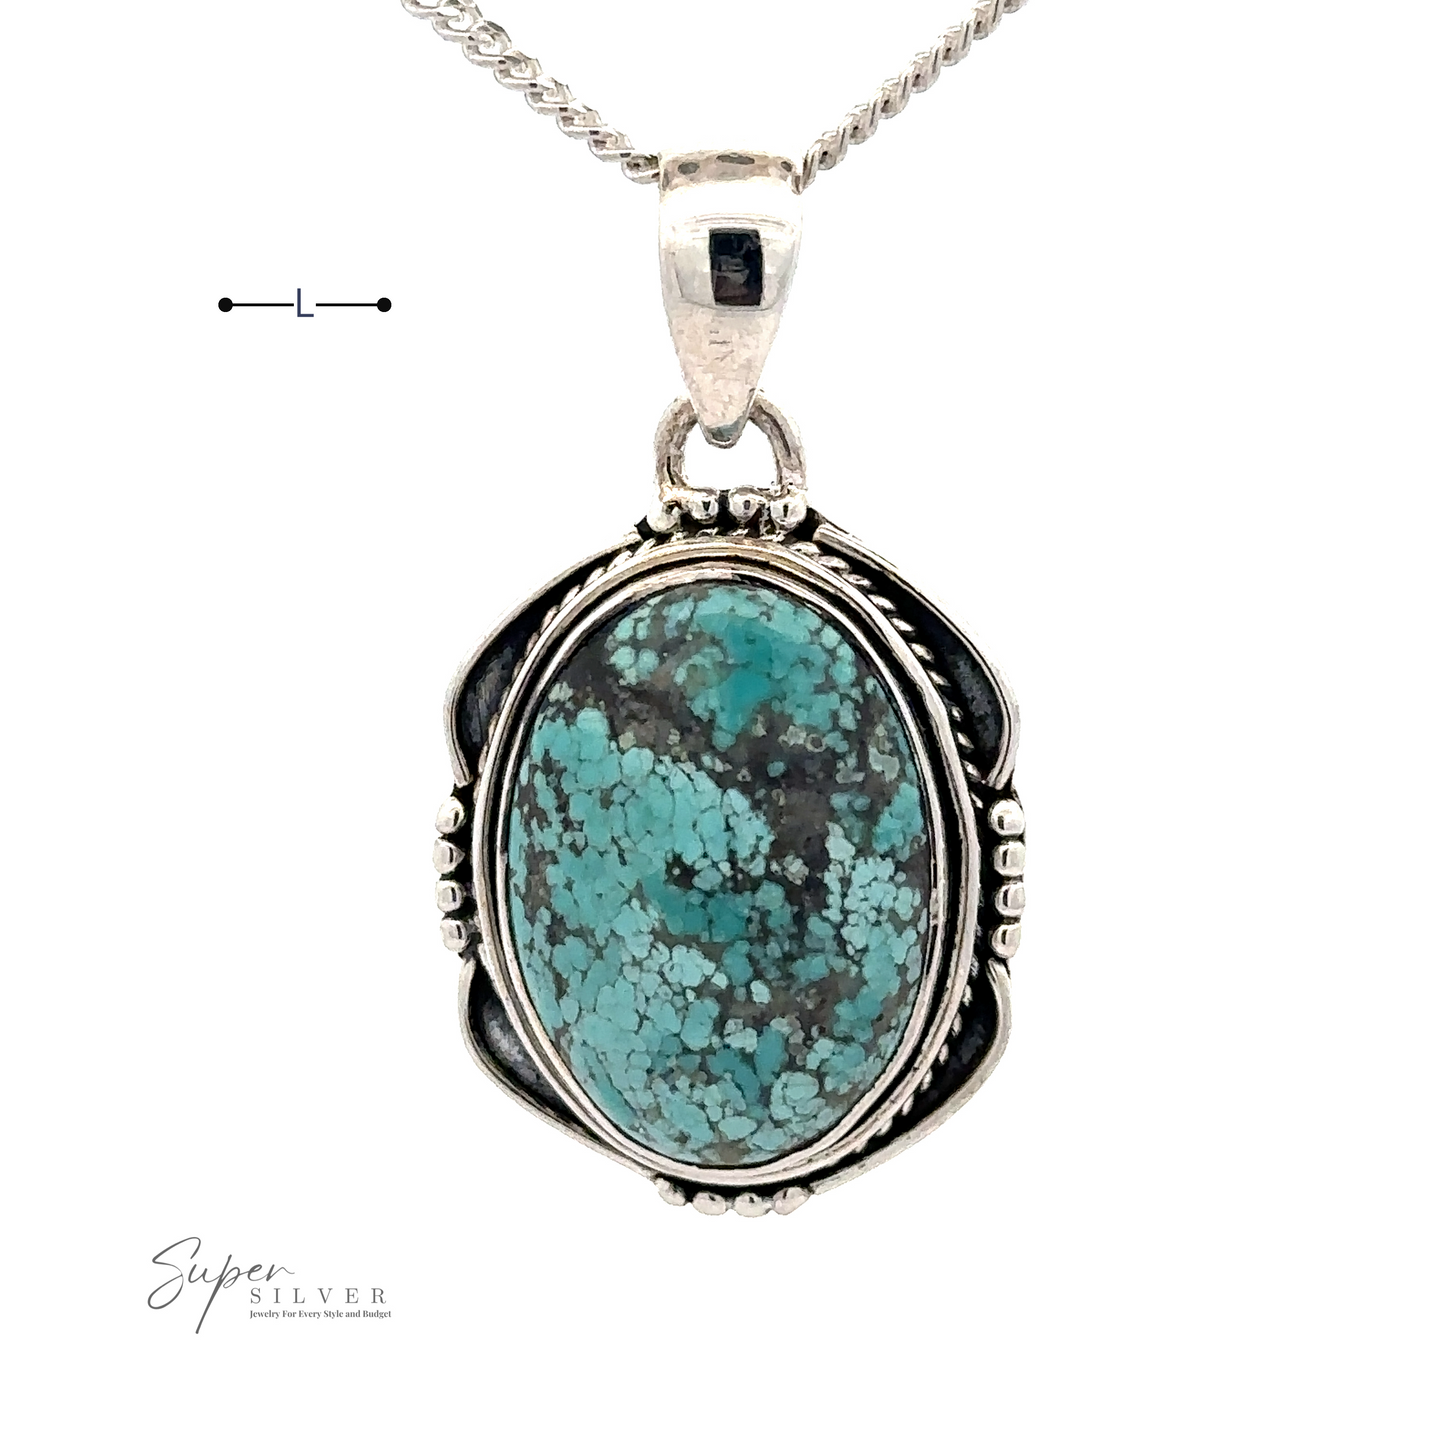 
                  
                    A Natural Turquoise Pendant with an Oval Shield Setting featuring a large natural turquoise stone. The chain, made of sterling silver, is visible, and the background is plain white.
                  
                